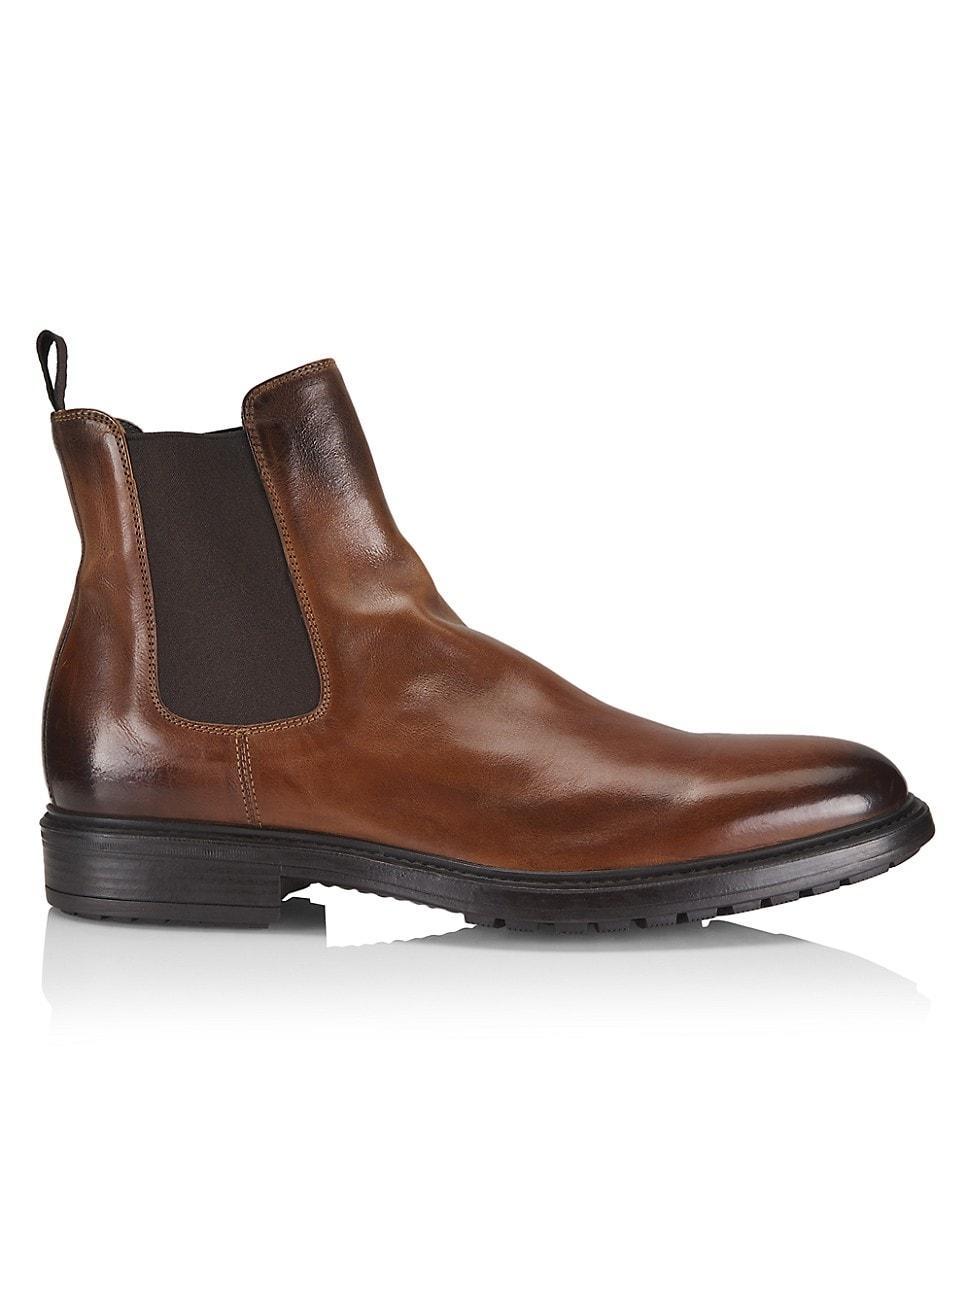 To Boot New York Largo Chelsea Boot Product Image